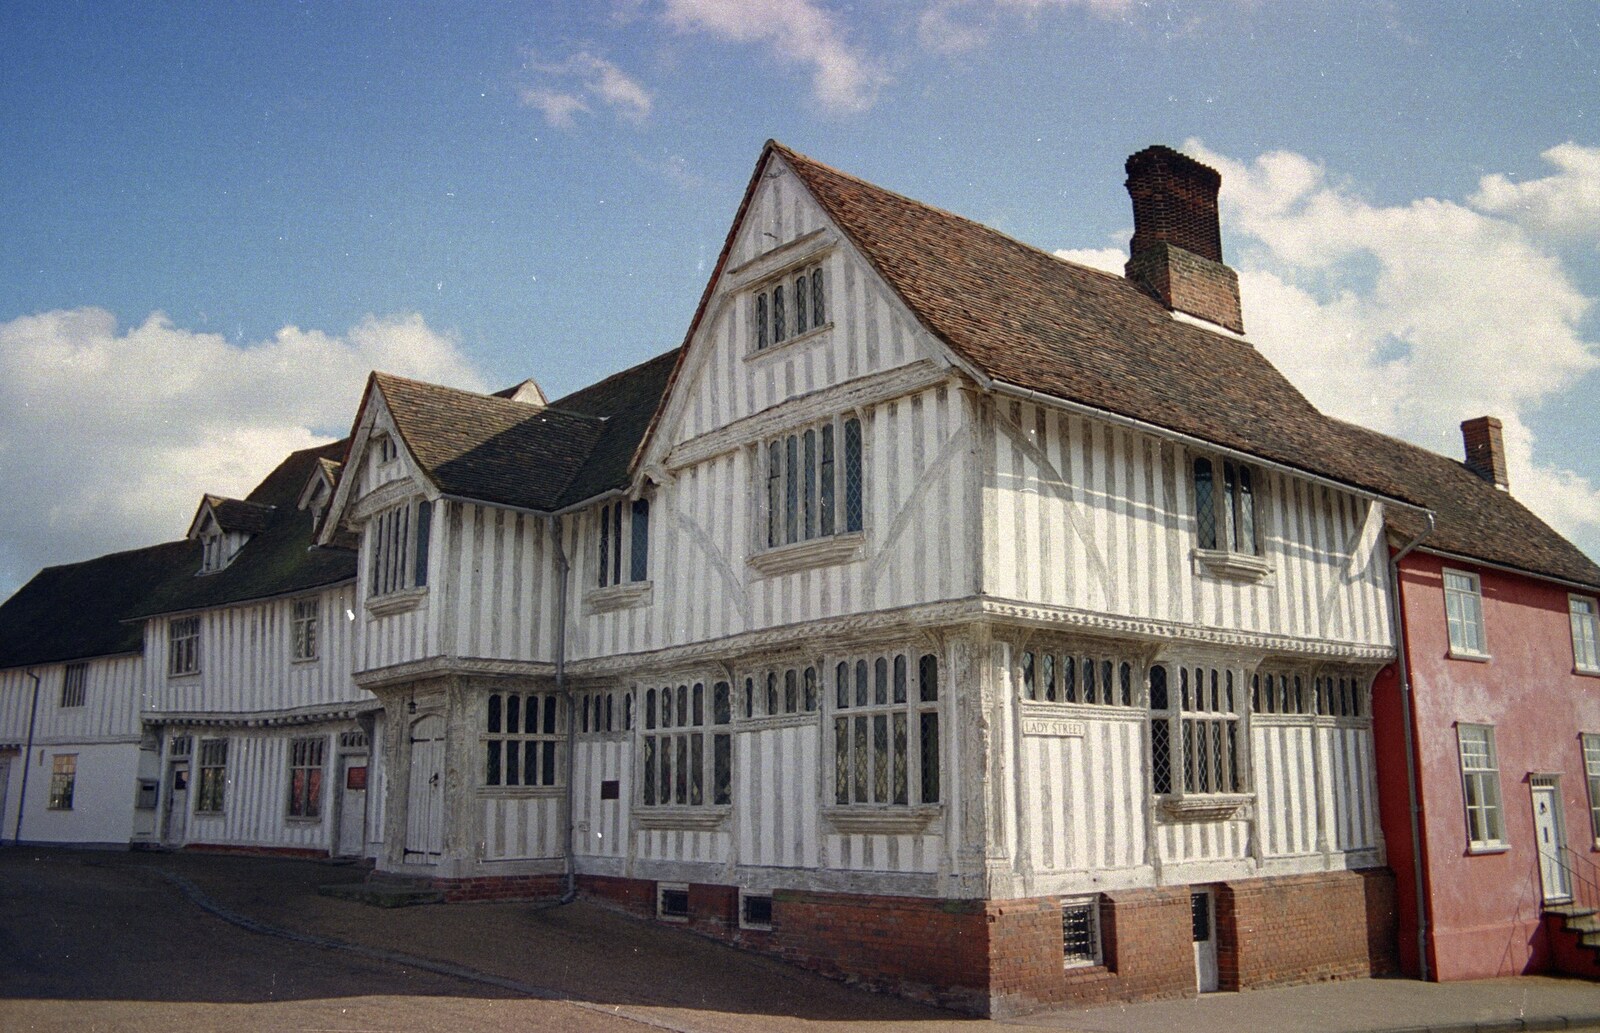 The Lavenham Guildhall from Mother and Mike Visit, Lavenham, Suffolk - 14th April 1996